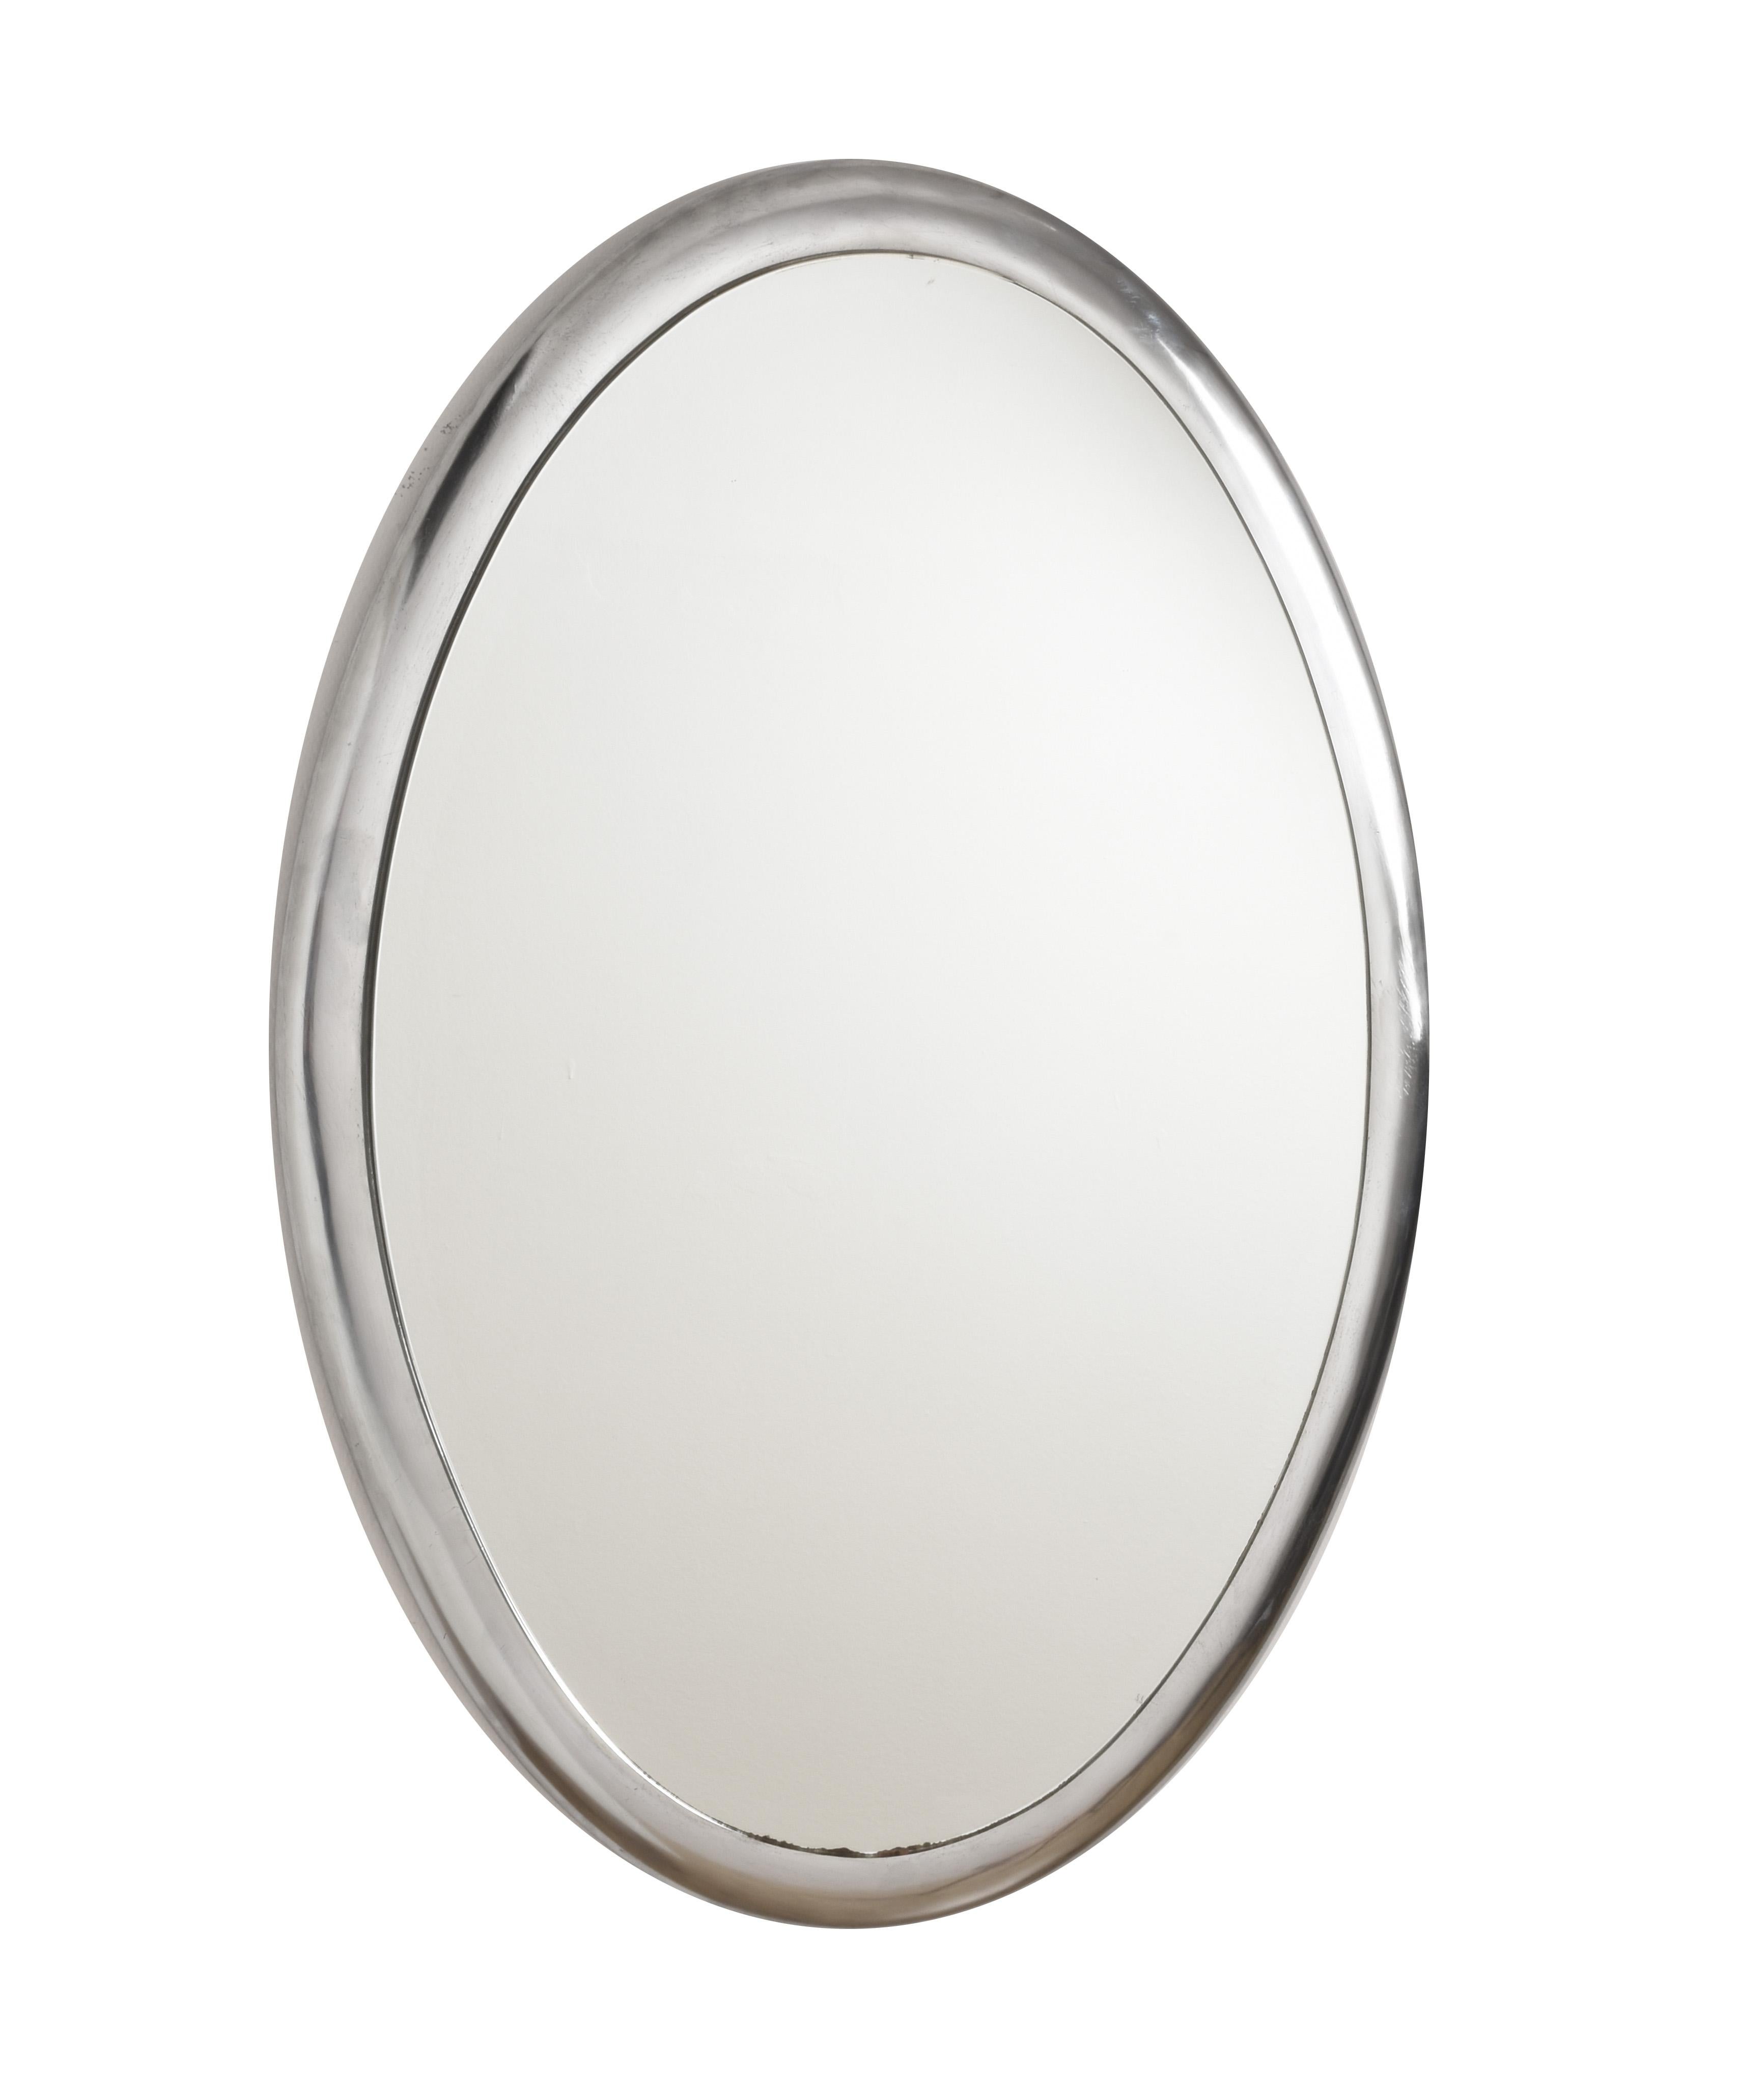 20th Century Oval Wall Mirror with Metal Frame, Italy, 1970s